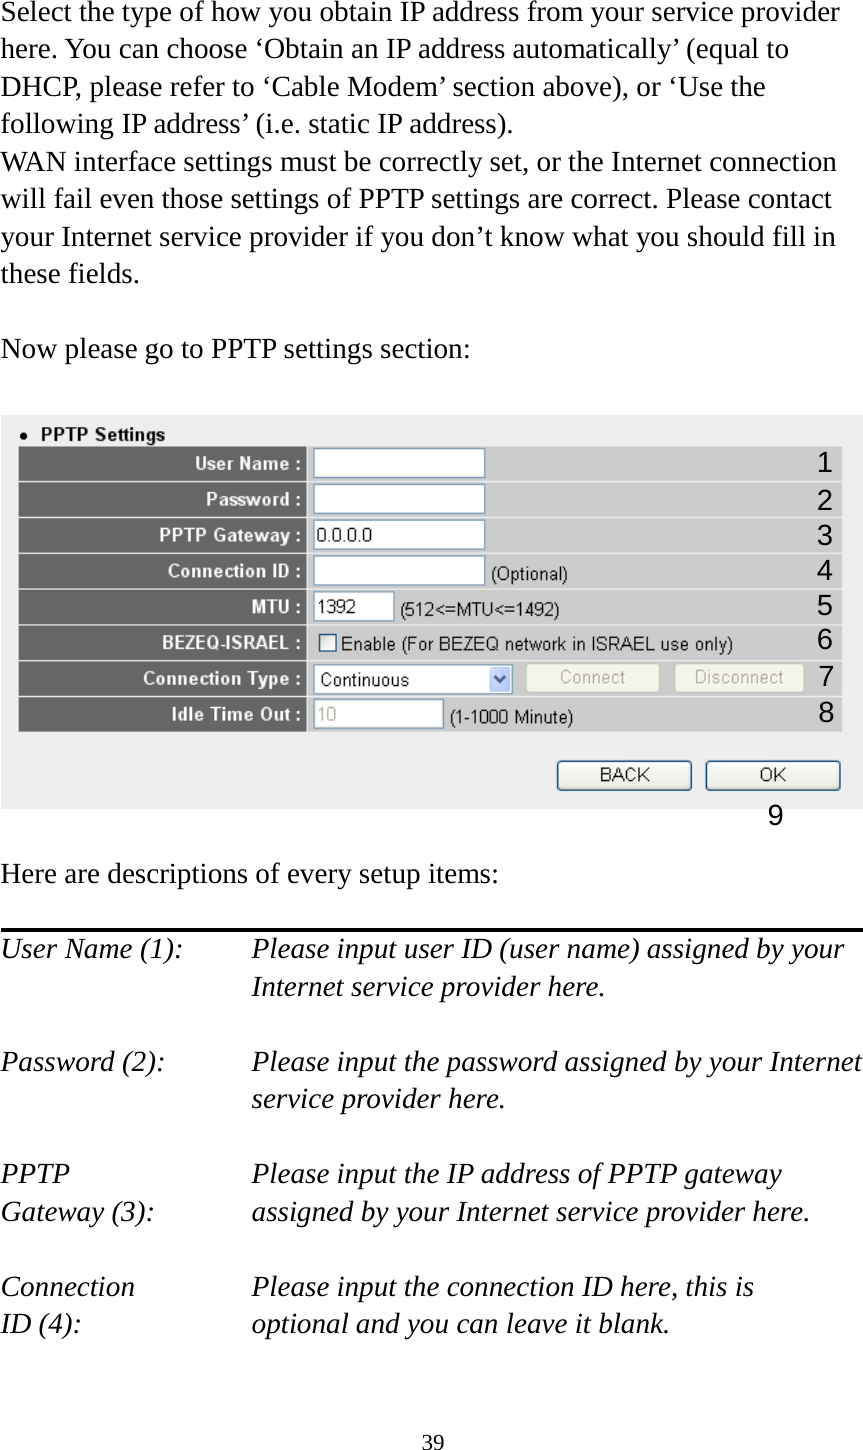 39  Select the type of how you obtain IP address from your service provider here. You can choose ‘Obtain an IP address automatically’ (equal to DHCP, please refer to ‘Cable Modem’ section above), or ‘Use the following IP address’ (i.e. static IP address).   WAN interface settings must be correctly set, or the Internet connection will fail even those settings of PPTP settings are correct. Please contact your Internet service provider if you don’t know what you should fill in these fields.  Now please go to PPTP settings section:    Here are descriptions of every setup items:  User Name (1):    Please input user ID (user name) assigned by your Internet service provider here.  Password (2):   Please input the password assigned by your Internet service provider here.  PPTP   Please input the IP address of PPTP gateway Gateway (3):   assigned by your Internet service provider here.  Connection       Please input the connection ID here, this is ID (4):         optional and you can leave it blank.  1 2 3 4 5 6 7 9 8 